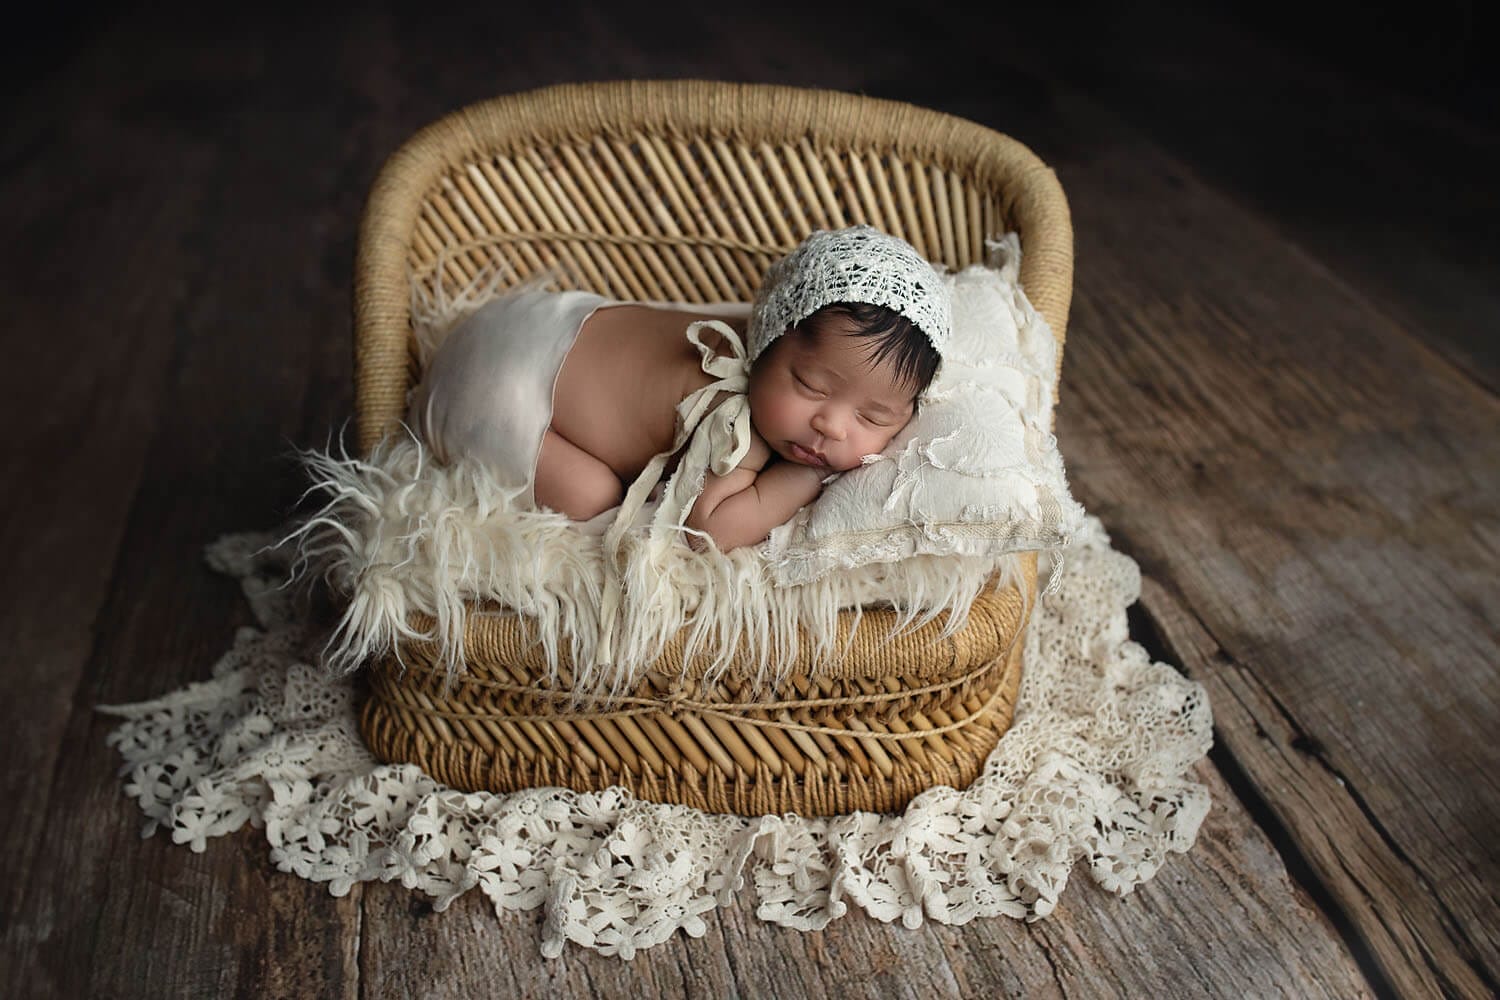 A newborn baby sleeps in a wicker bench on a pillow and fur blanket in a studio after meeting new orleans pediatricians